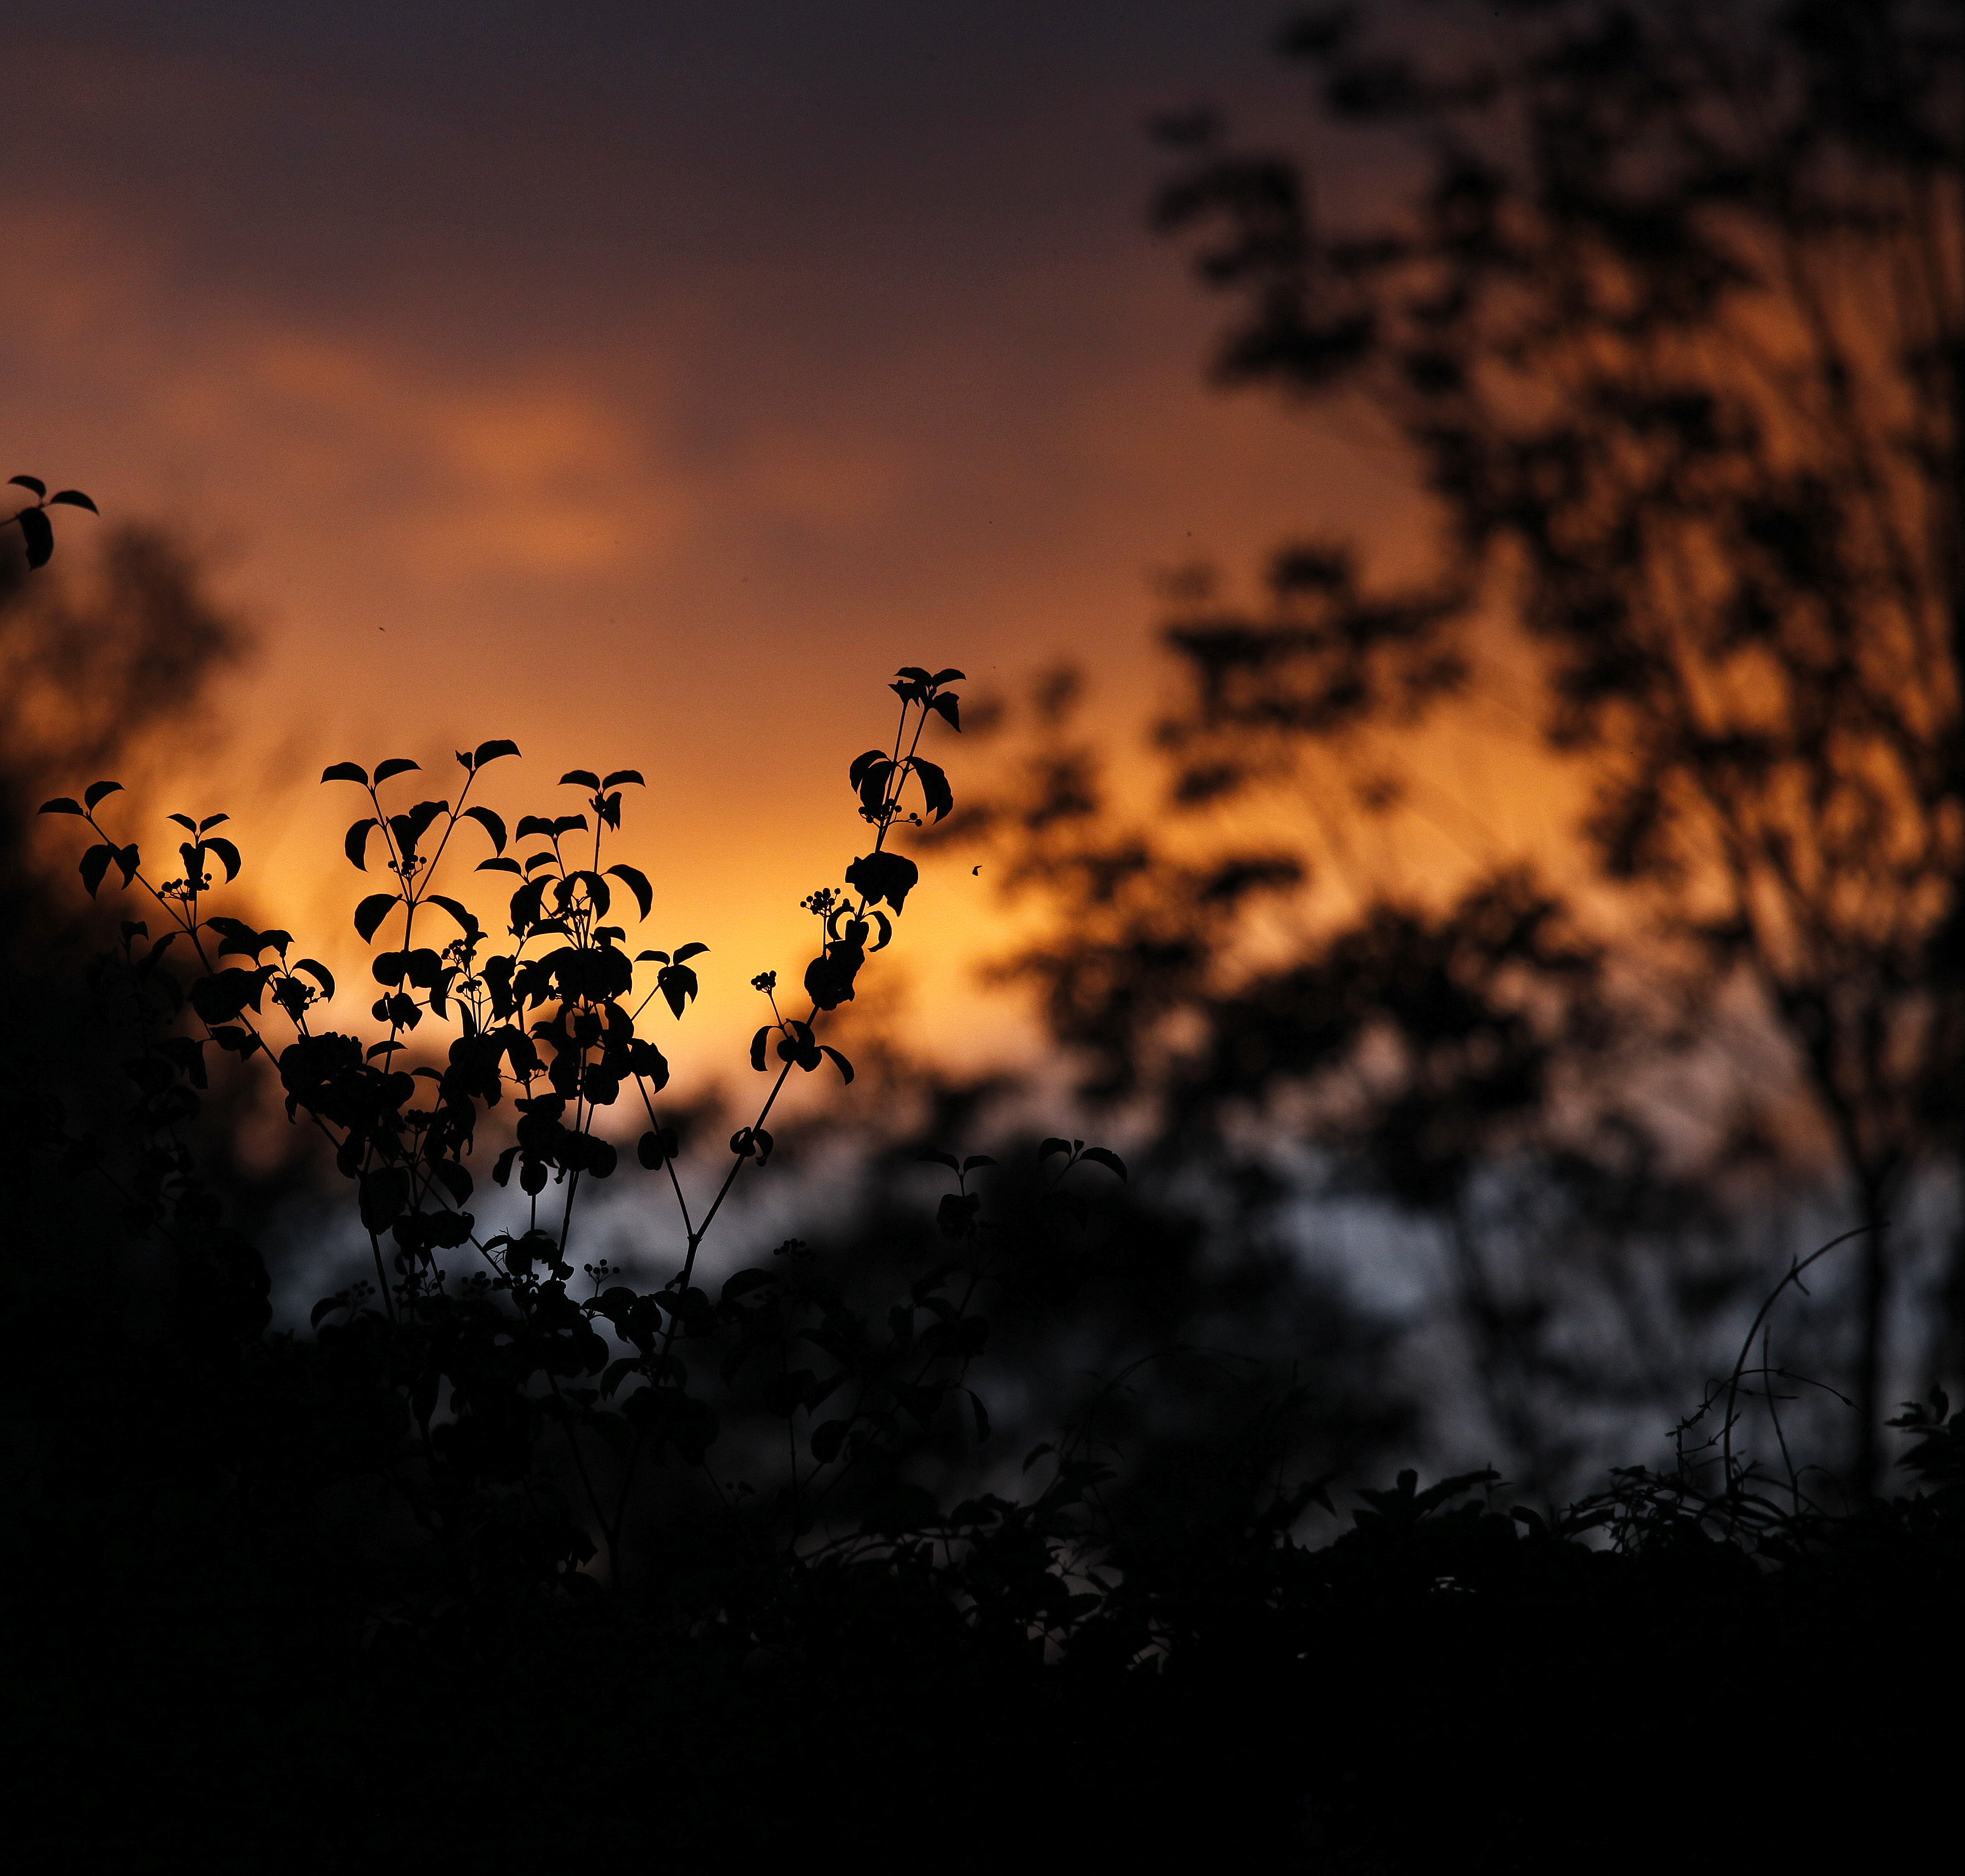 dark, sunset, silhouettes, leaves, outlines, plants